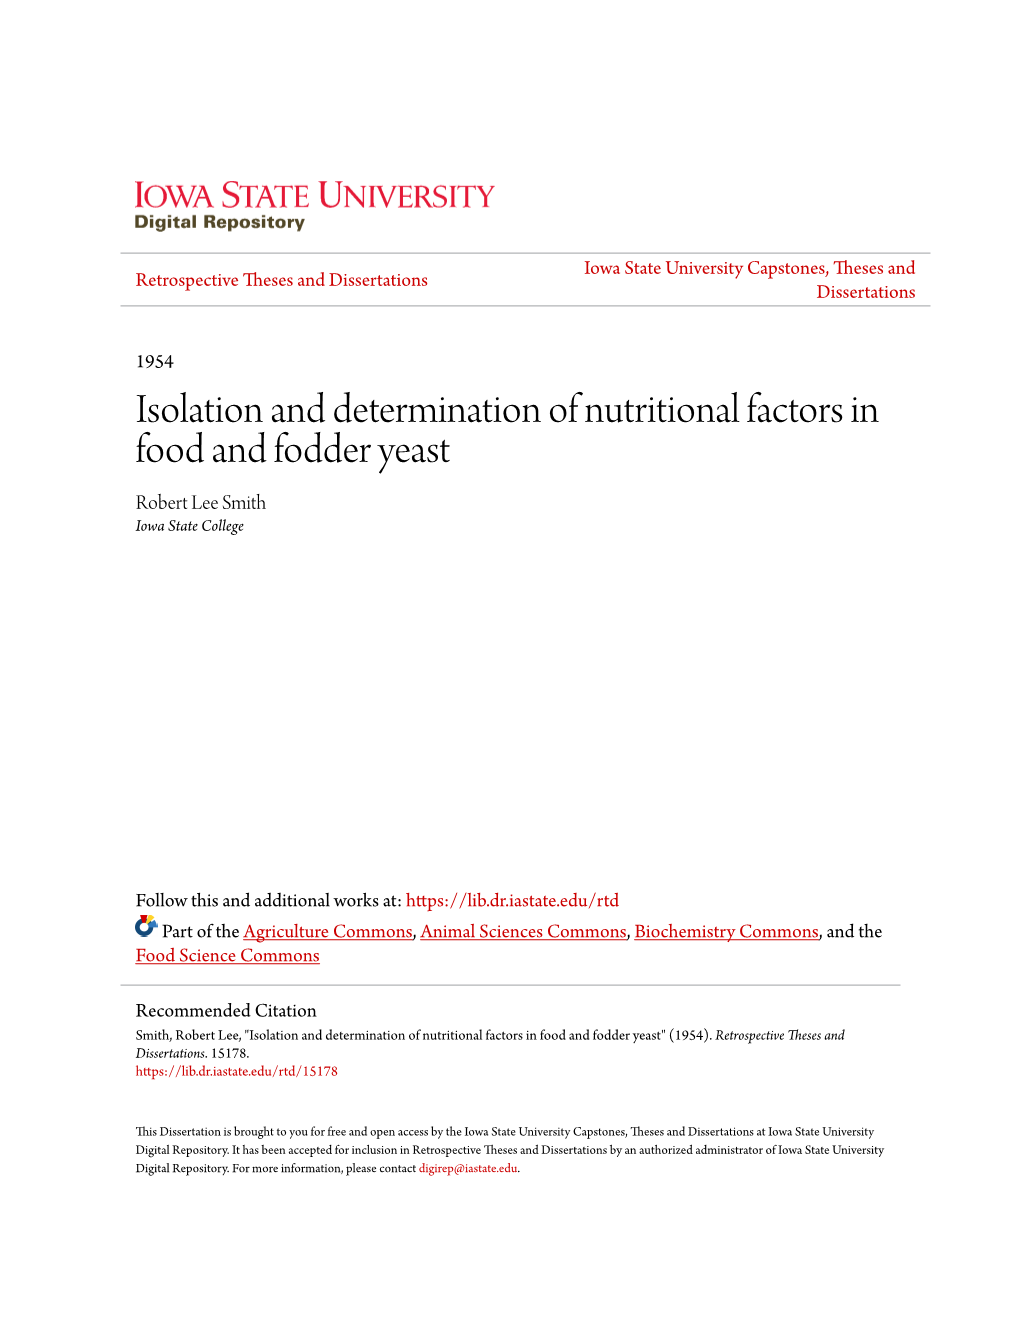 Isolation and Determination of Nutritional Factors in Food and Fodder Yeast Robert Lee Smith Iowa State College